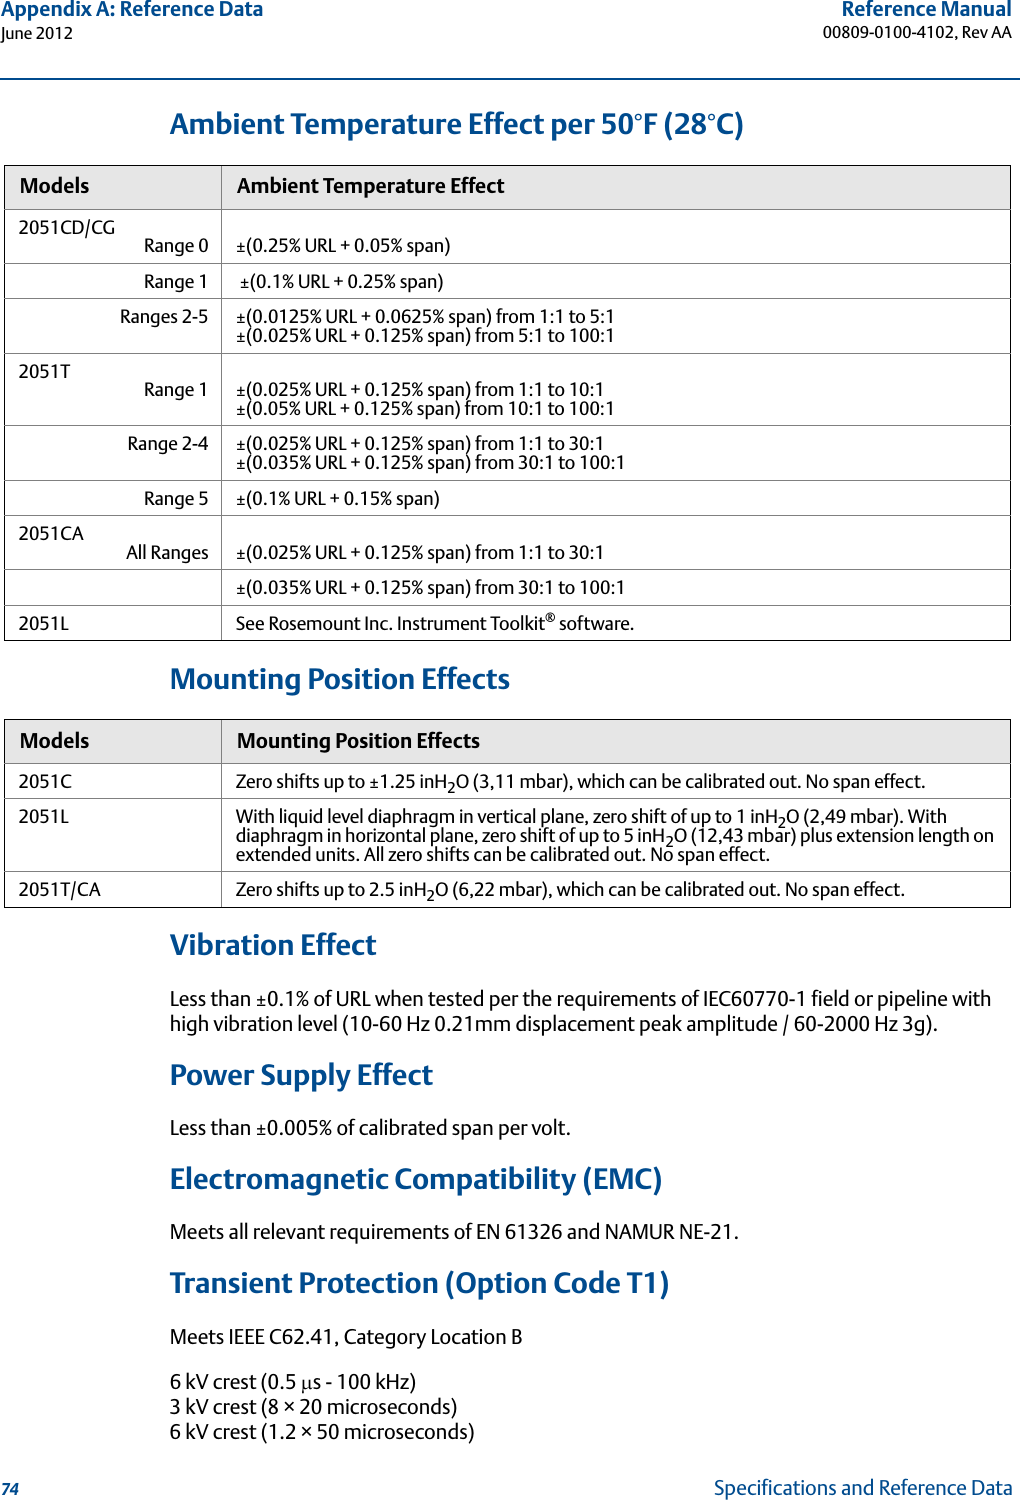 74Reference Manual00809-0100-4102, Rev AAAppendix A: Reference DataJune 2012Specifications and Reference DataAmbient Temperature Effect per 50°F (28°C)Mounting Position EffectsVibration EffectLess than ±0.1% of URL when tested per the requirements of IEC60770-1 field or pipeline with high vibration level (10-60 Hz 0.21mm displacement peak amplitude / 60-2000 Hz 3g).Power Supply EffectLess than ±0.005% of calibrated span per volt.Electromagnetic Compatibility (EMC)Meets all relevant requirements of EN 61326 and NAMUR NE-21.Transient Protection (Option Code T1)Meets IEEE C62.41, Category Location B6 kV crest (0.5 s - 100 kHz)3 kV crest (8 × 20 microseconds)6 kV crest (1.2 × 50 microseconds)Models Ambient Temperature Effect2051CD/CG  Range 0 ±(0.25% URL + 0.05% span)Range 1  ±(0.1% URL + 0.25% span)Ranges 2-5 ±(0.0125% URL + 0.0625% span) from 1:1 to 5:1±(0.025% URL + 0.125% span) from 5:1 to 100:12051T Range 1 ±(0.025% URL + 0.125% span) from 1:1 to 10:1±(0.05% URL + 0.125% span) from 10:1 to 100:1Range 2-4 ±(0.025% URL + 0.125% span) from 1:1 to 30:1±(0.035% URL + 0.125% span) from 30:1 to 100:1Range 5 ±(0.1% URL + 0.15% span)2051CA All Ranges ±(0.025% URL + 0.125% span) from 1:1 to 30:1±(0.035% URL + 0.125% span) from 30:1 to 100:12051L See Rosemount Inc. Instrument Toolkit® software.Models Mounting Position Effects2051C Zero shifts up to ±1.25 inH2O (3,11 mbar), which can be calibrated out. No span effect.2051L With liquid level diaphragm in vertical plane, zero shift of up to 1 inH2O (2,49 mbar). With diaphragm in horizontal plane, zero shift of up to 5 inH2O (12,43 mbar) plus extension length on extended units. All zero shifts can be calibrated out. No span effect.2051T/CA Zero shifts up to 2.5 inH2O (6,22 mbar), which can be calibrated out. No span effect.